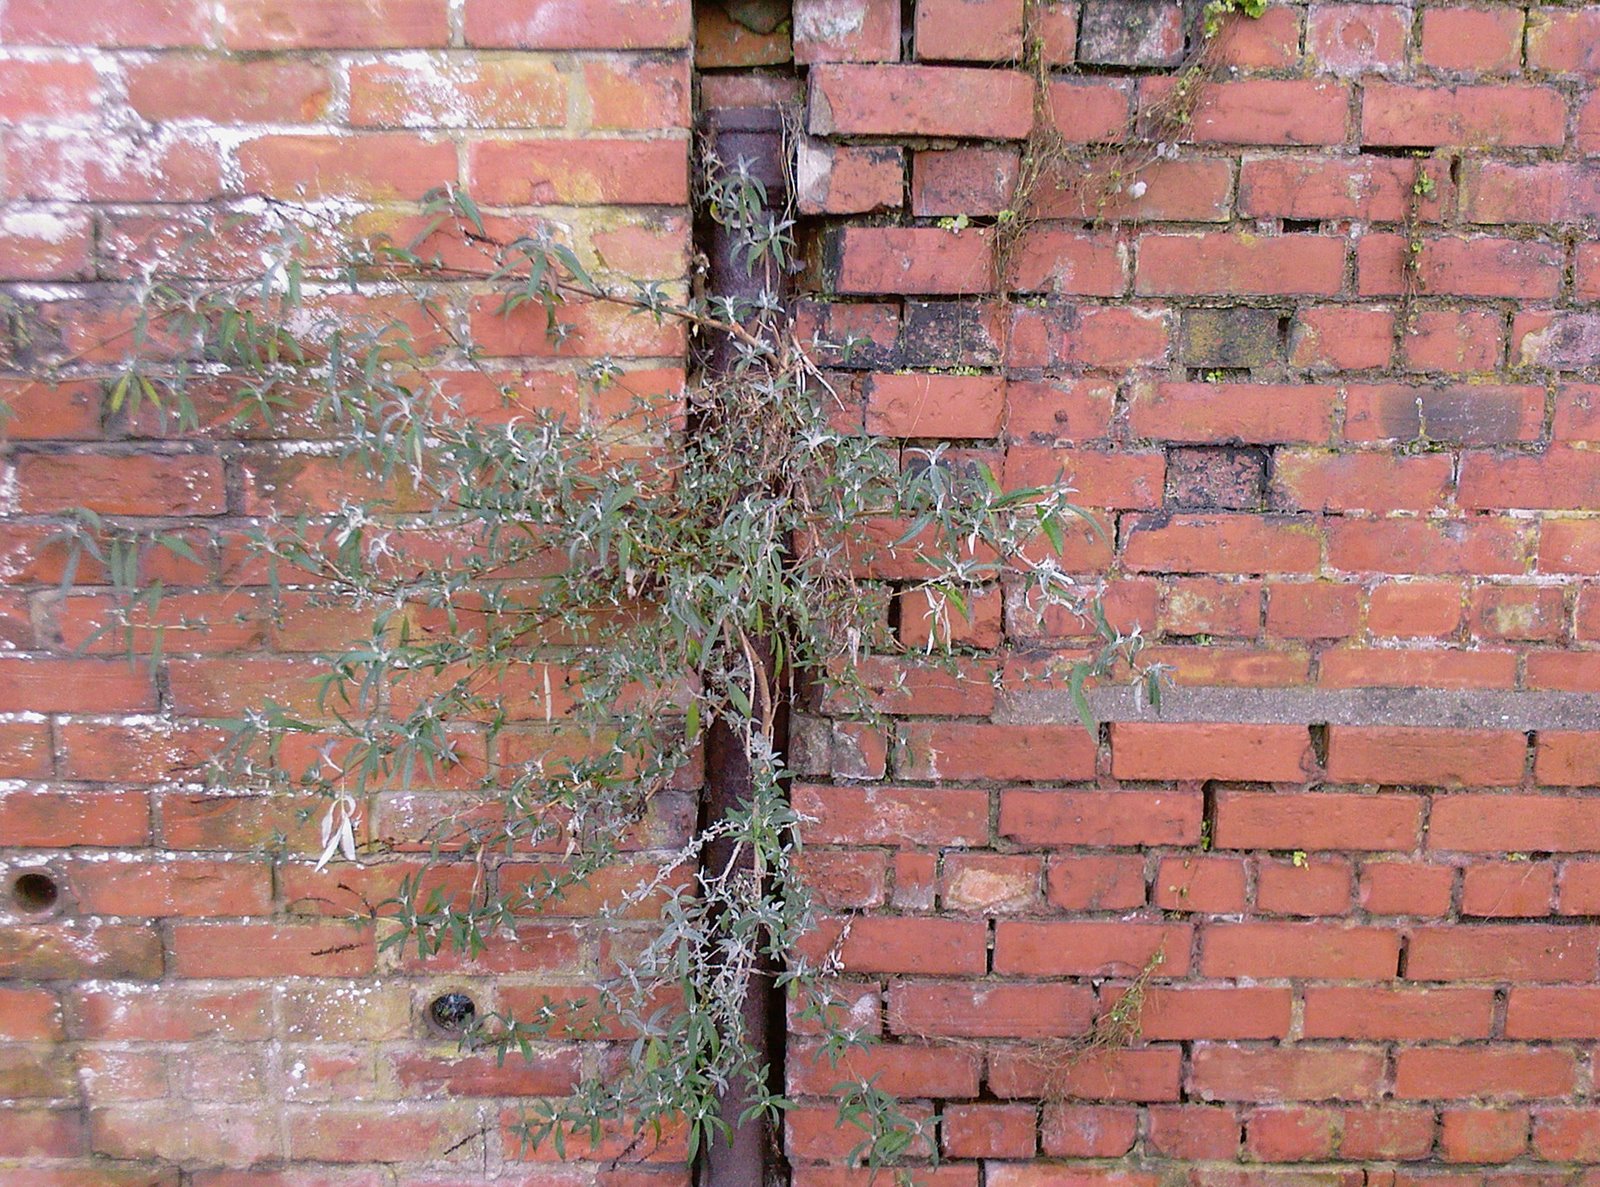 [LUCY+CORRANDER++-++LOOSE+AND+LEAFY++-++BUDDLEIA+IN+WALL++-++13TH+JANUARY+2009.jpg]